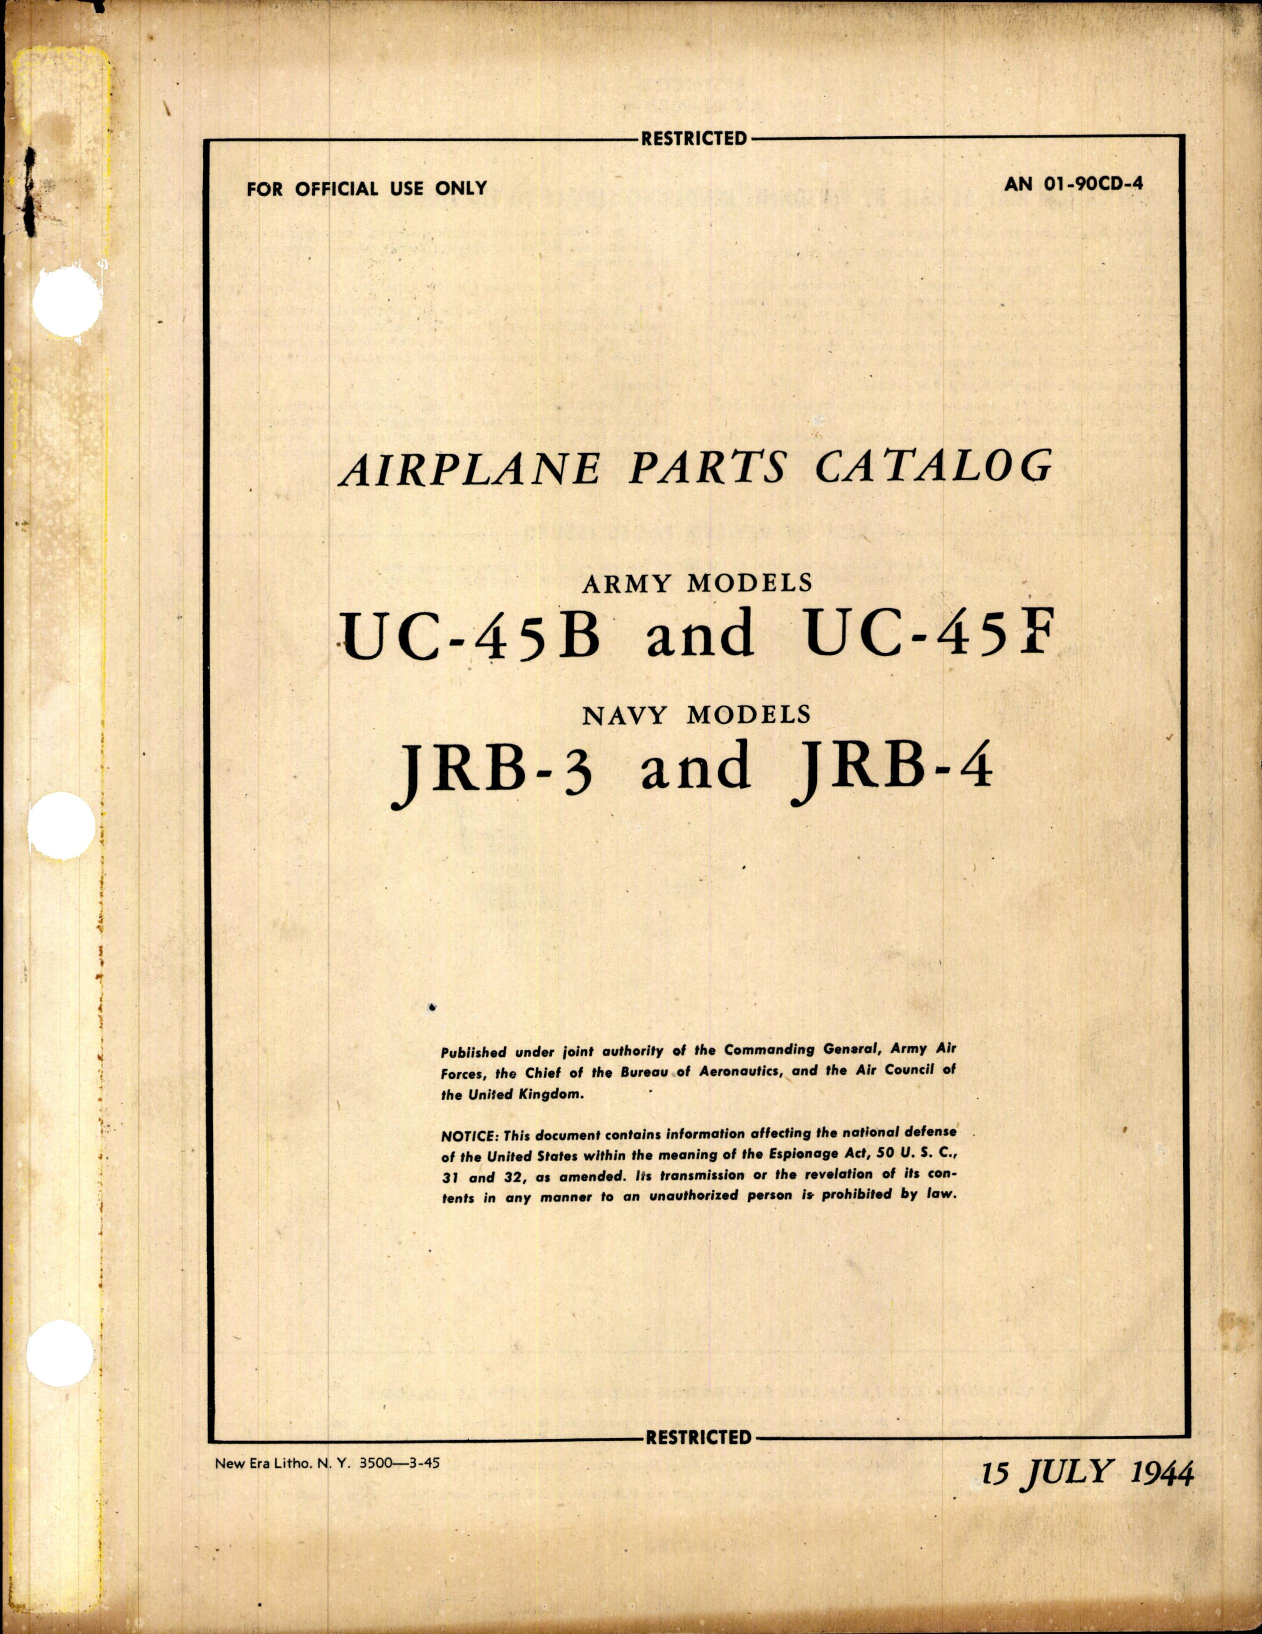 Sample page 1 from AirCorps Library document: Parts Catalog for UC-45B, UC-45F, JRB-3, and JRB-4